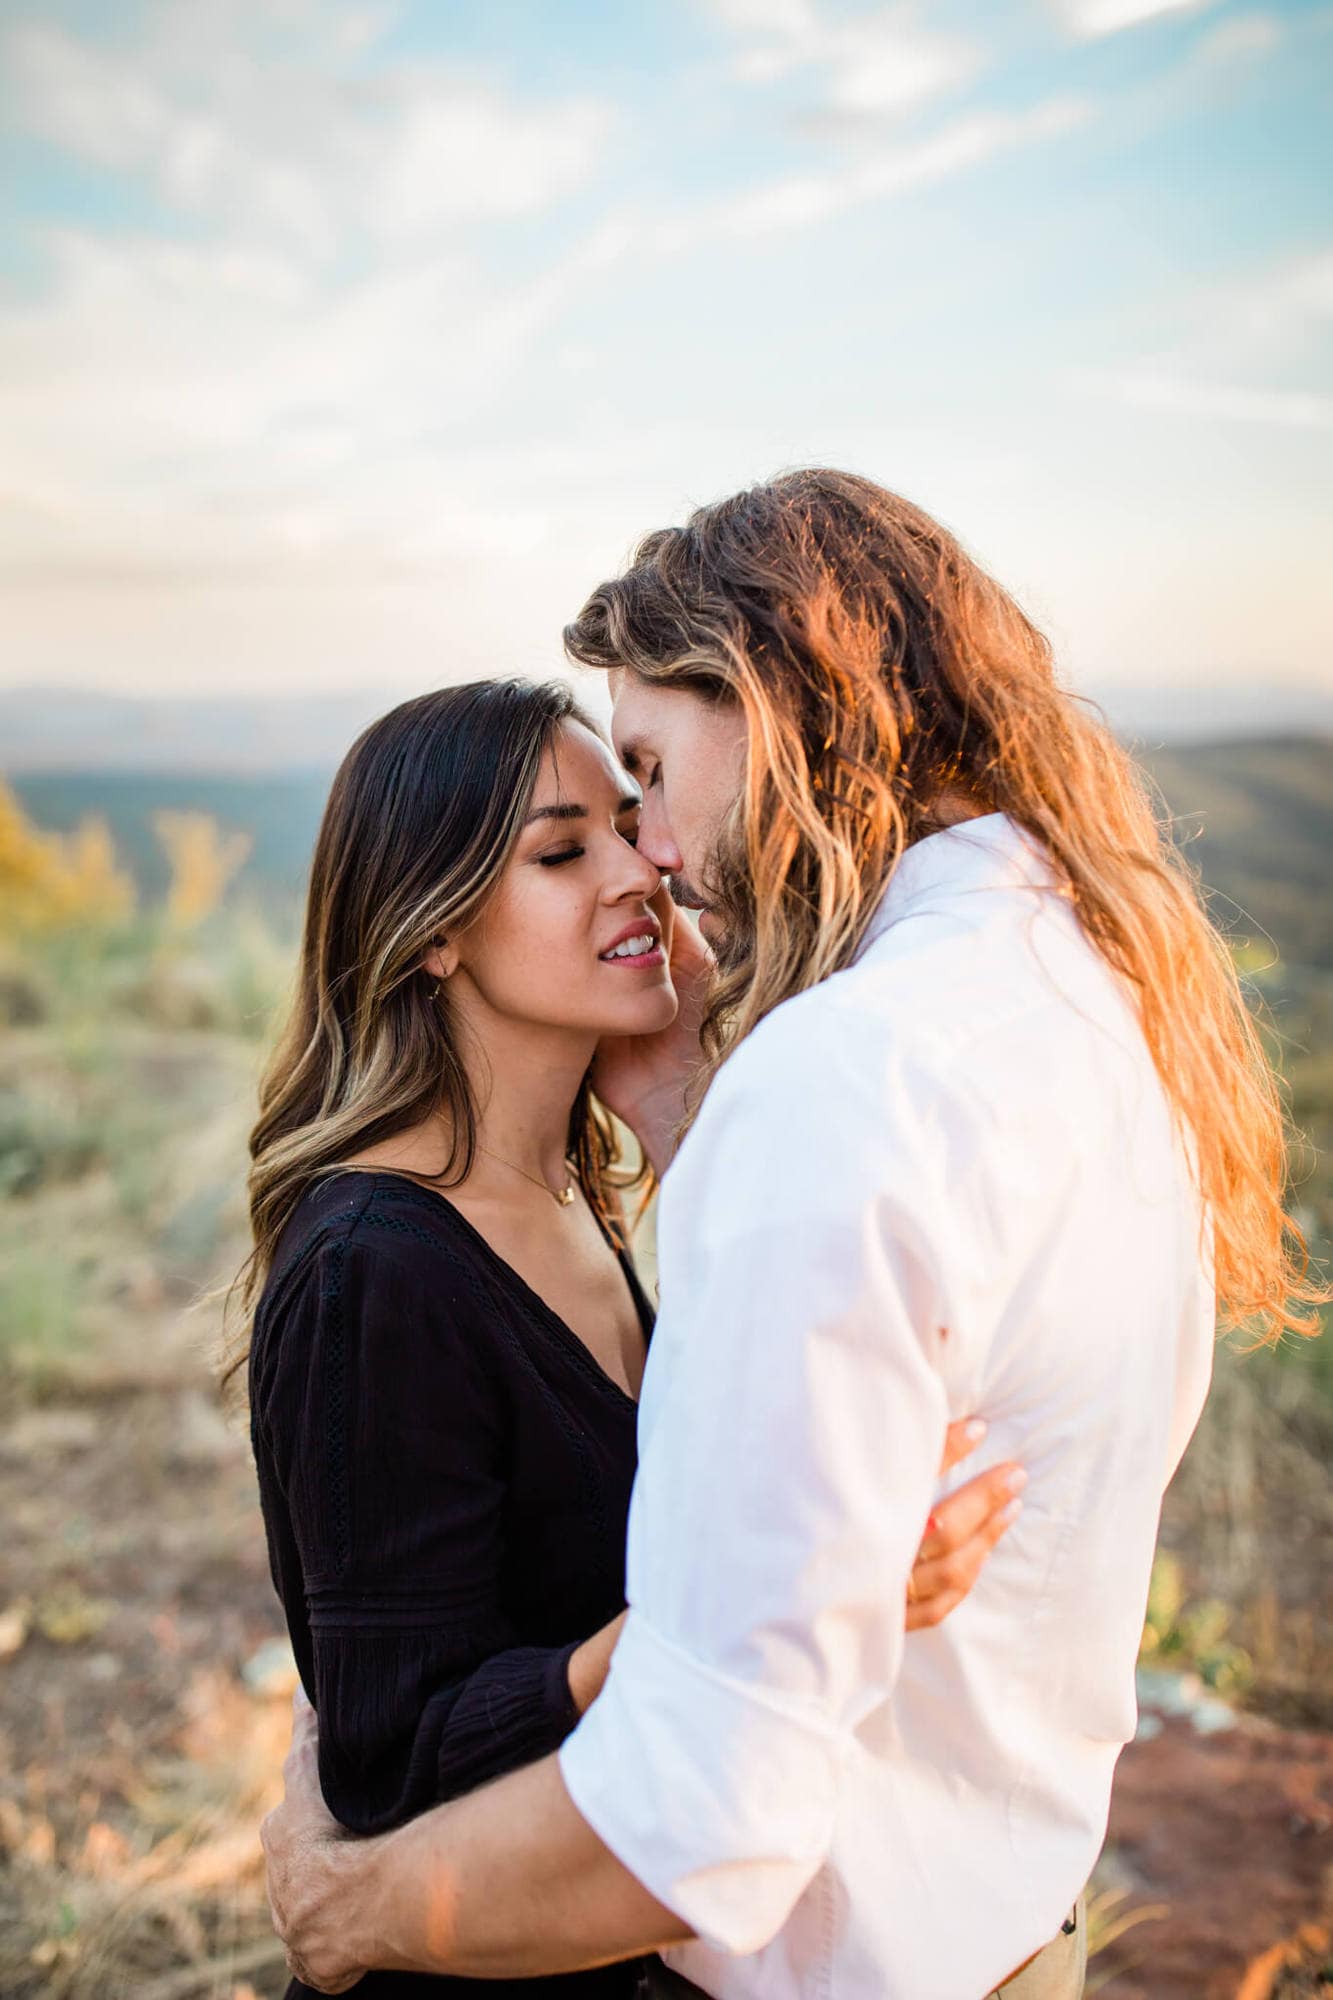 Leah and David snuggle in close during their forest engagement photos at the Mogollon Rim; the perfect spot for adventure and forest vibes.